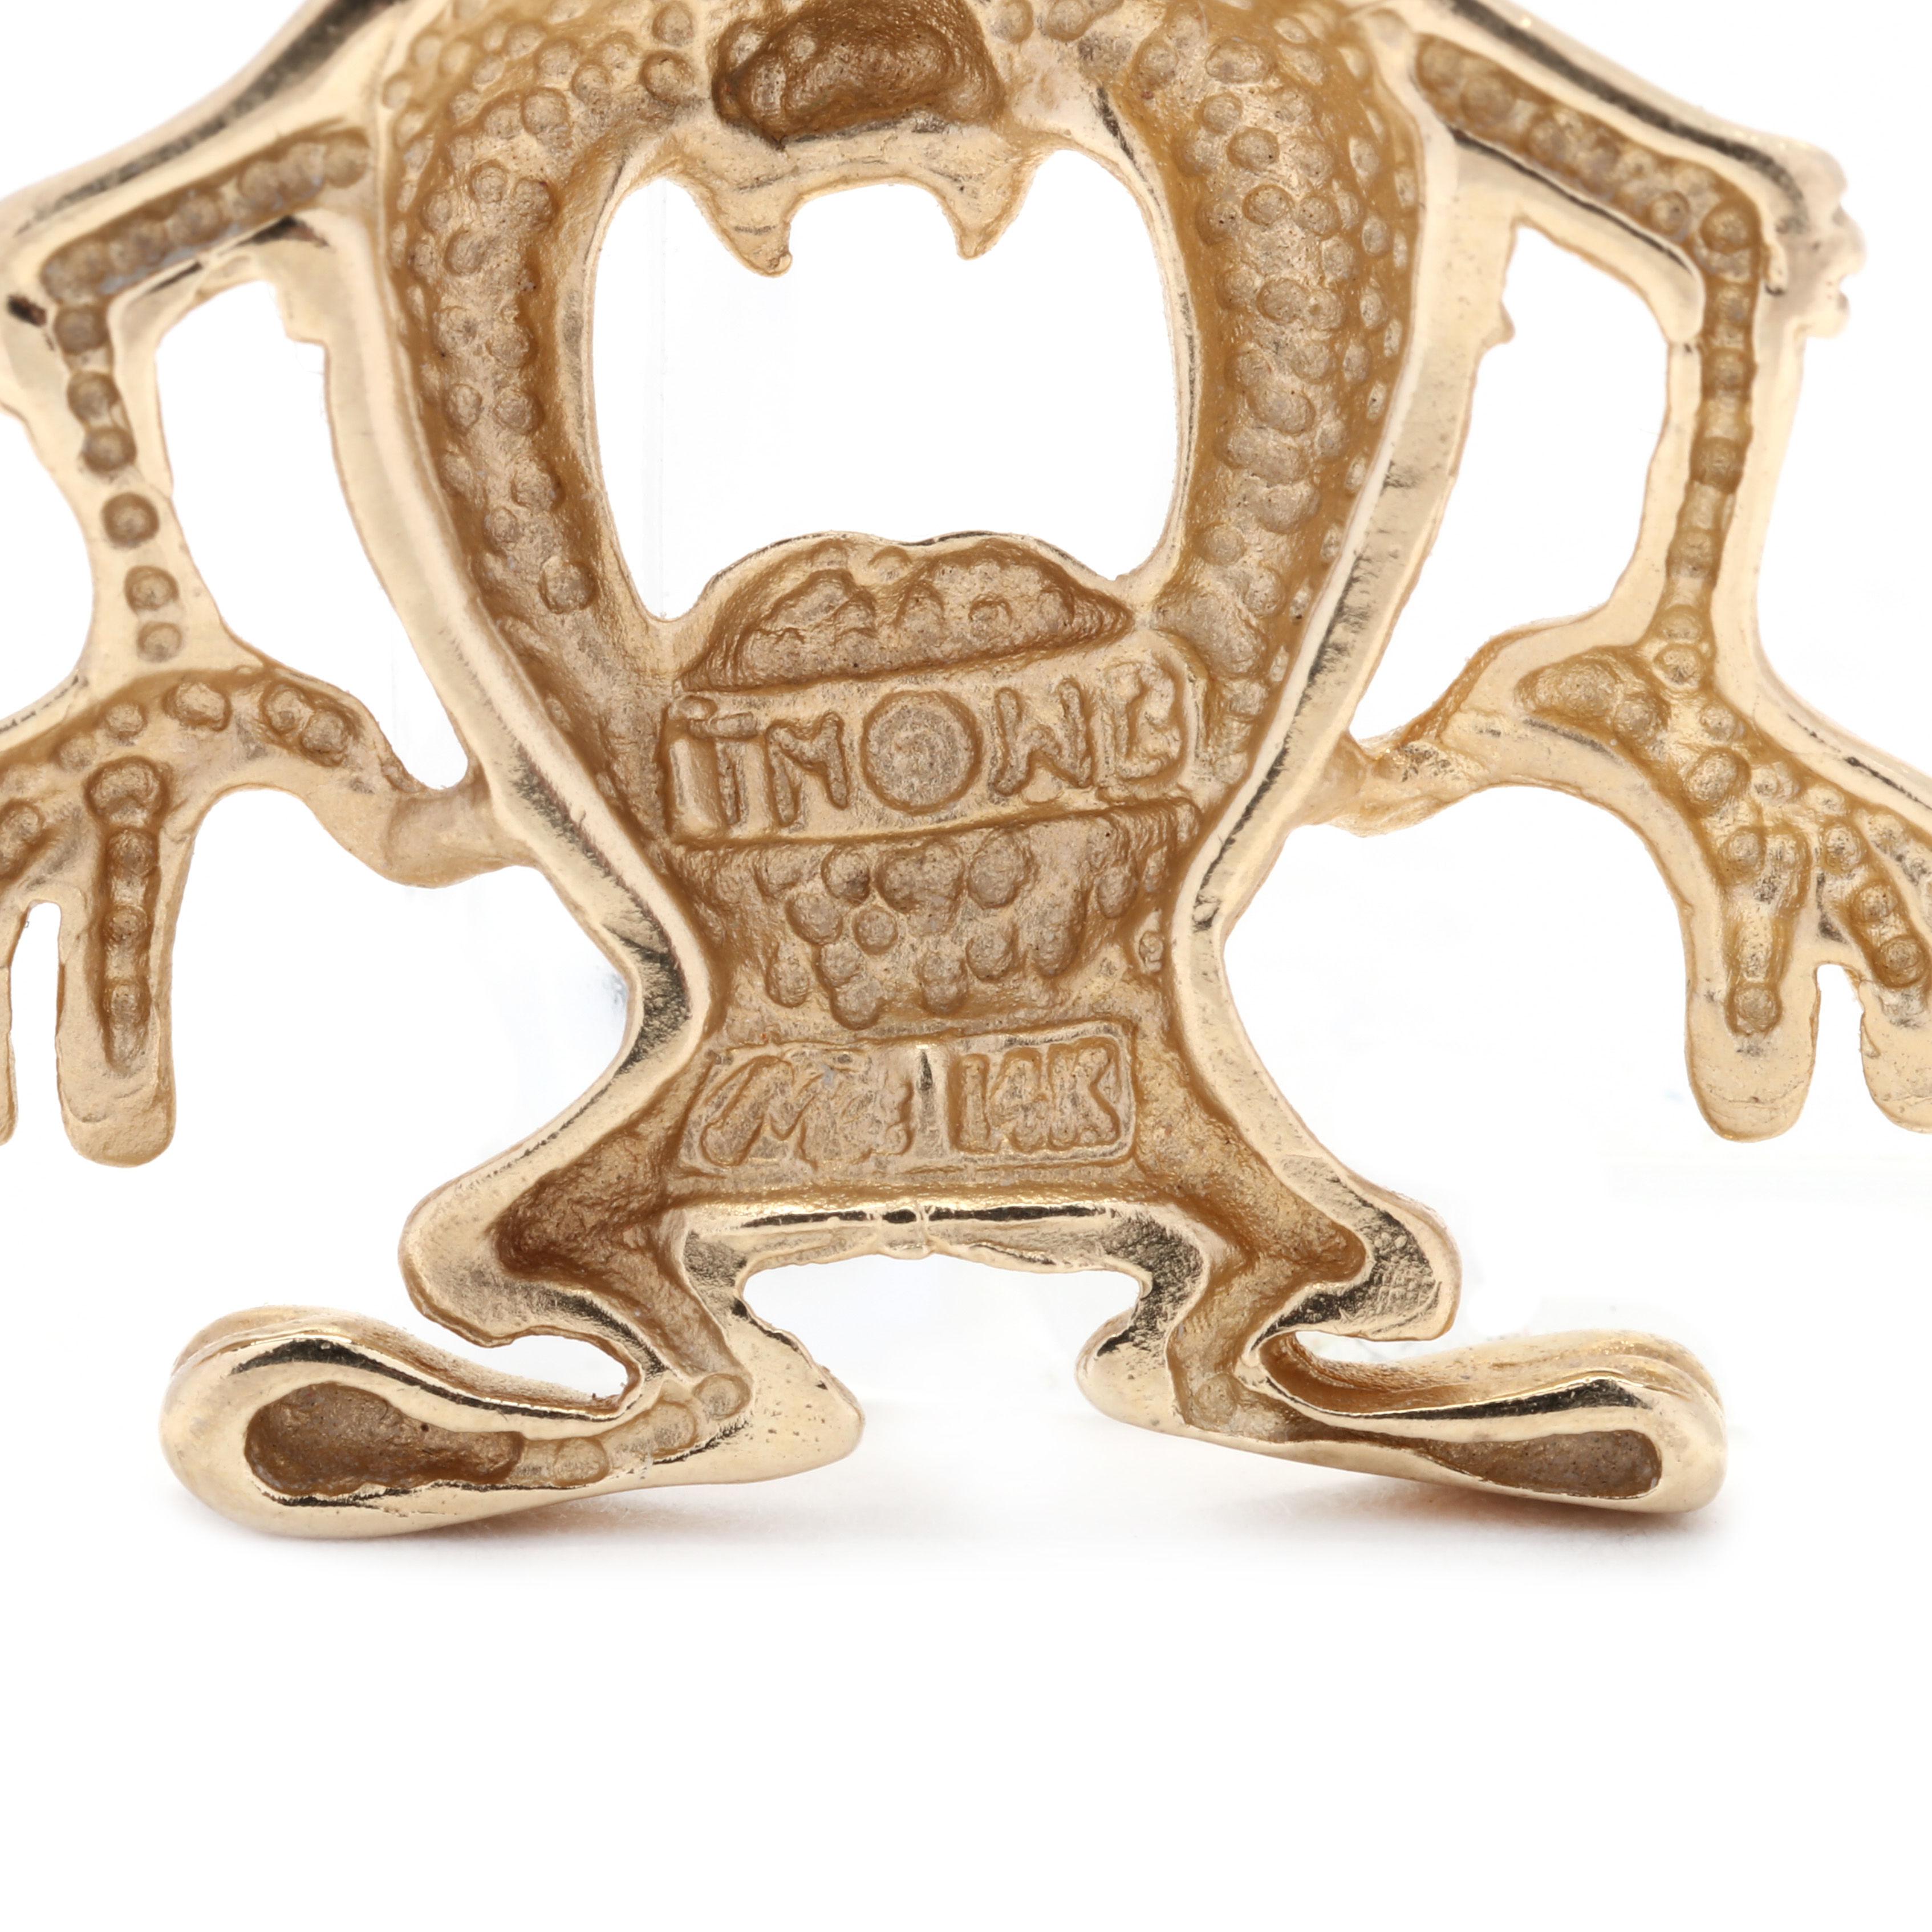 A vintage 14 karat yellow gold tazmanian devil charm. This charm features the Looney Toons 